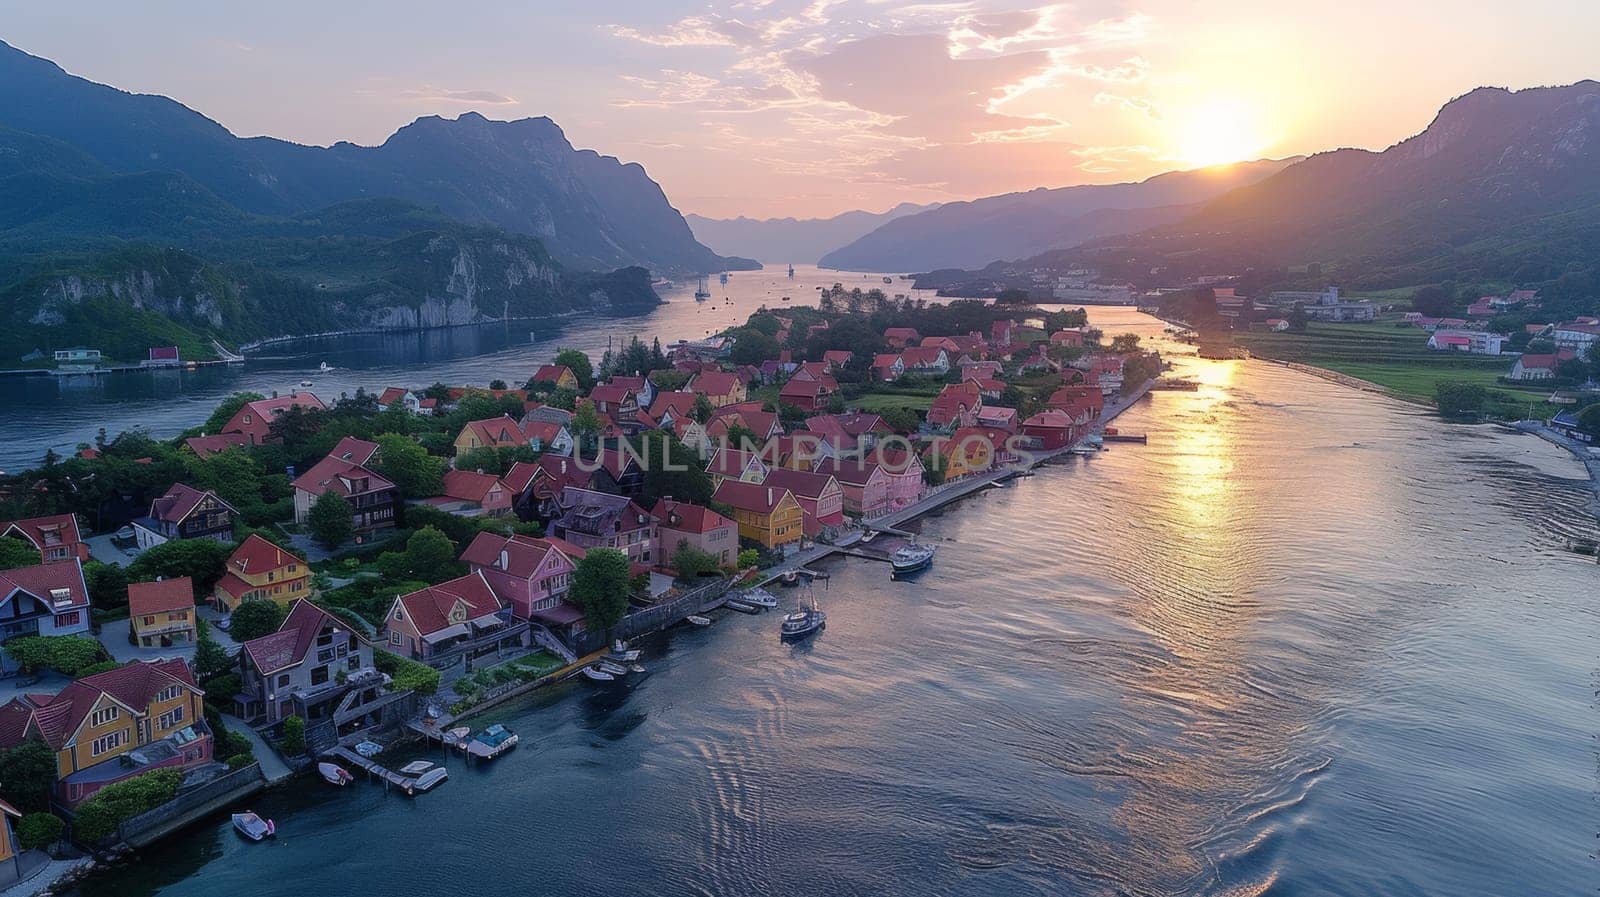 A view of a beautiful sunset over the water and houses, AI by starush